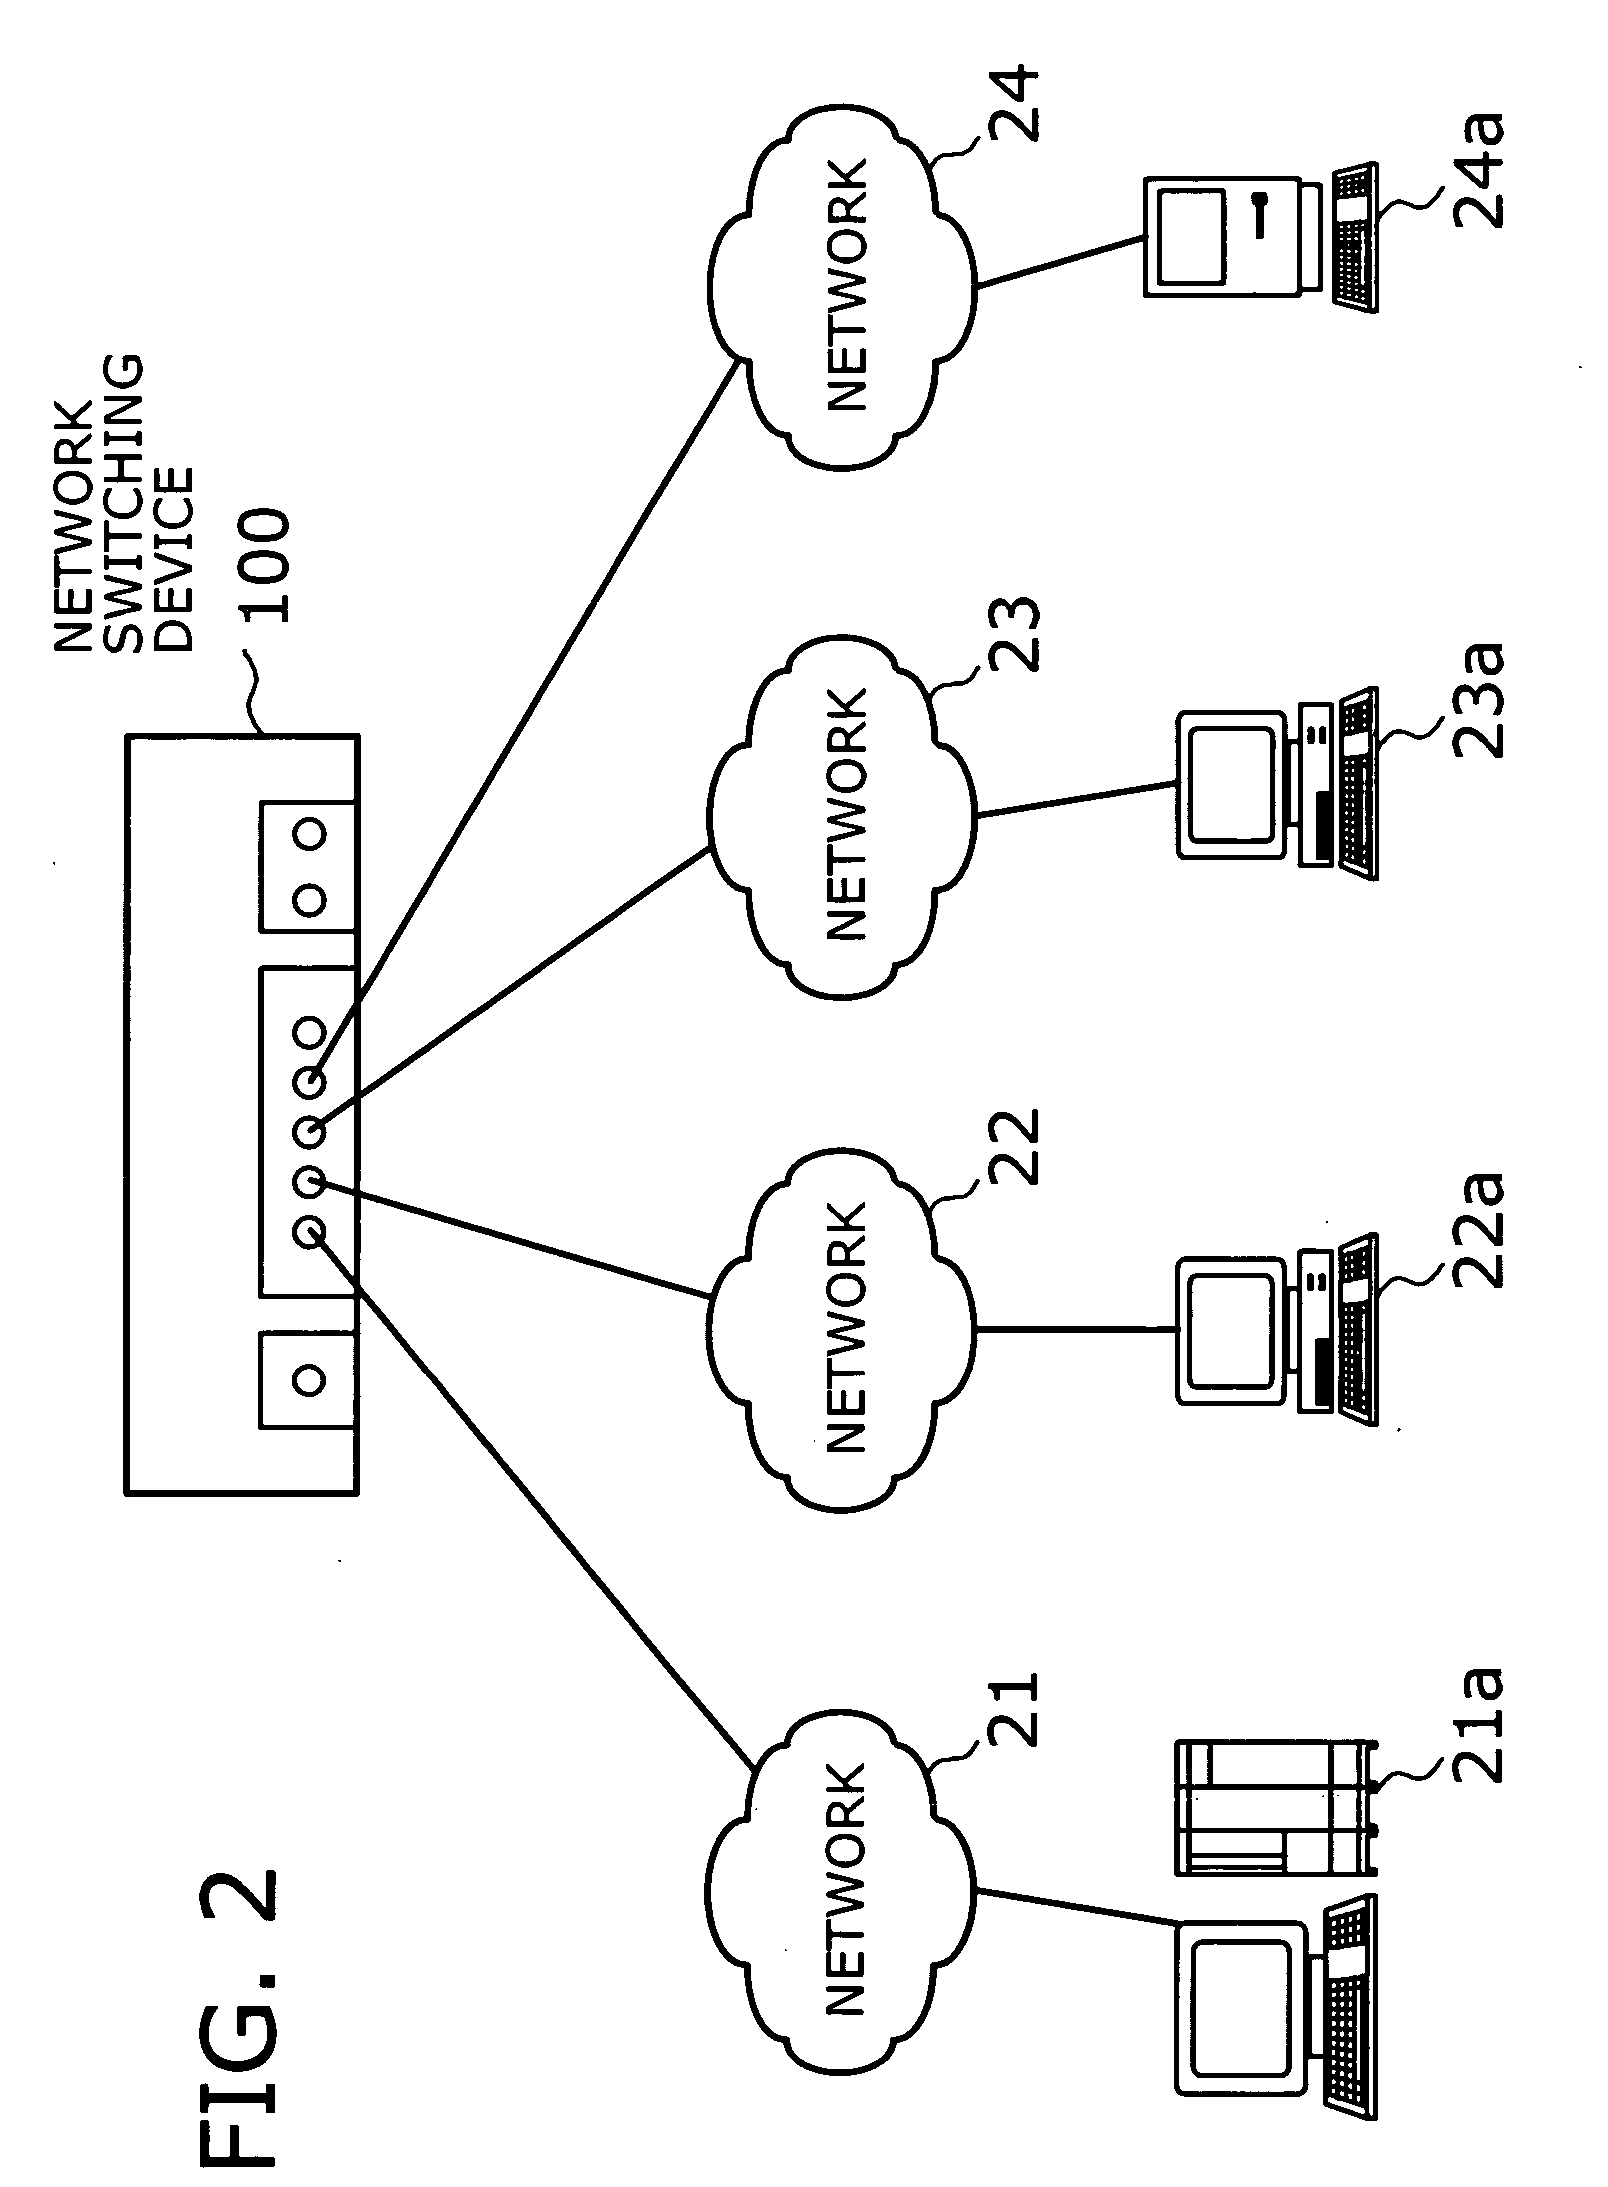 Network switching device and method using shared buffer